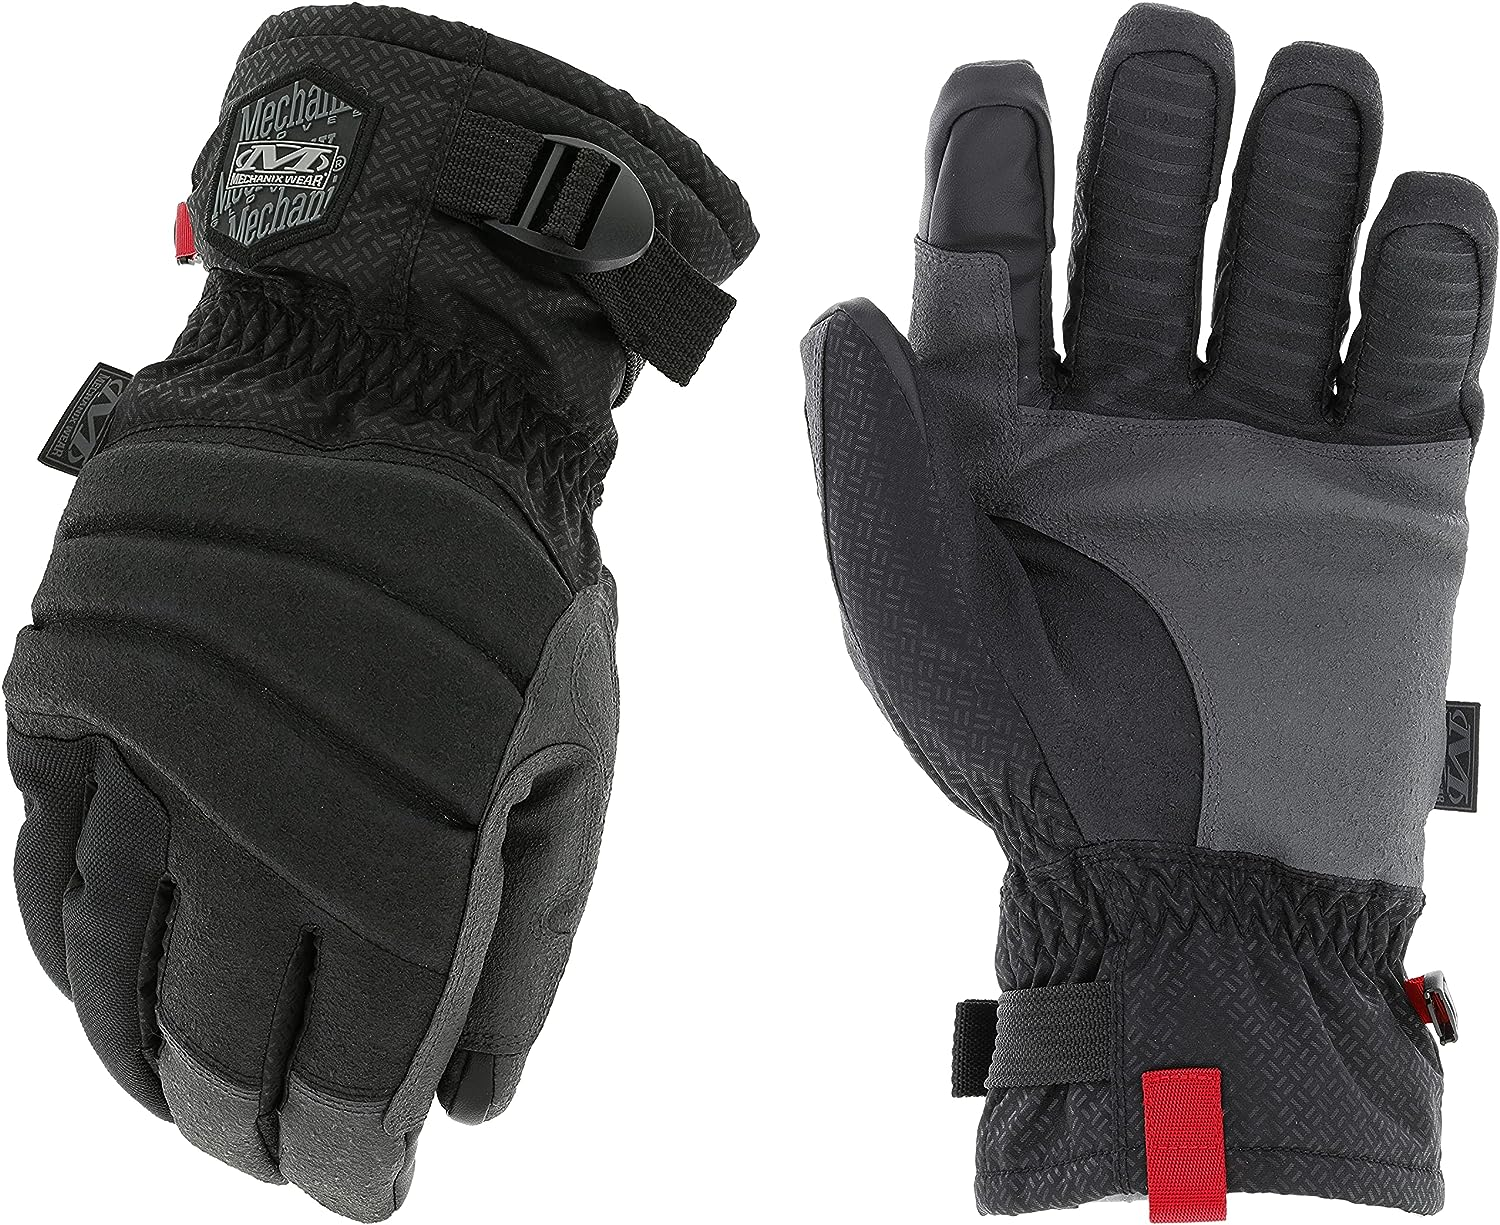 Best Winter Gloves For Men: Keeping Your Hands Warm in Style